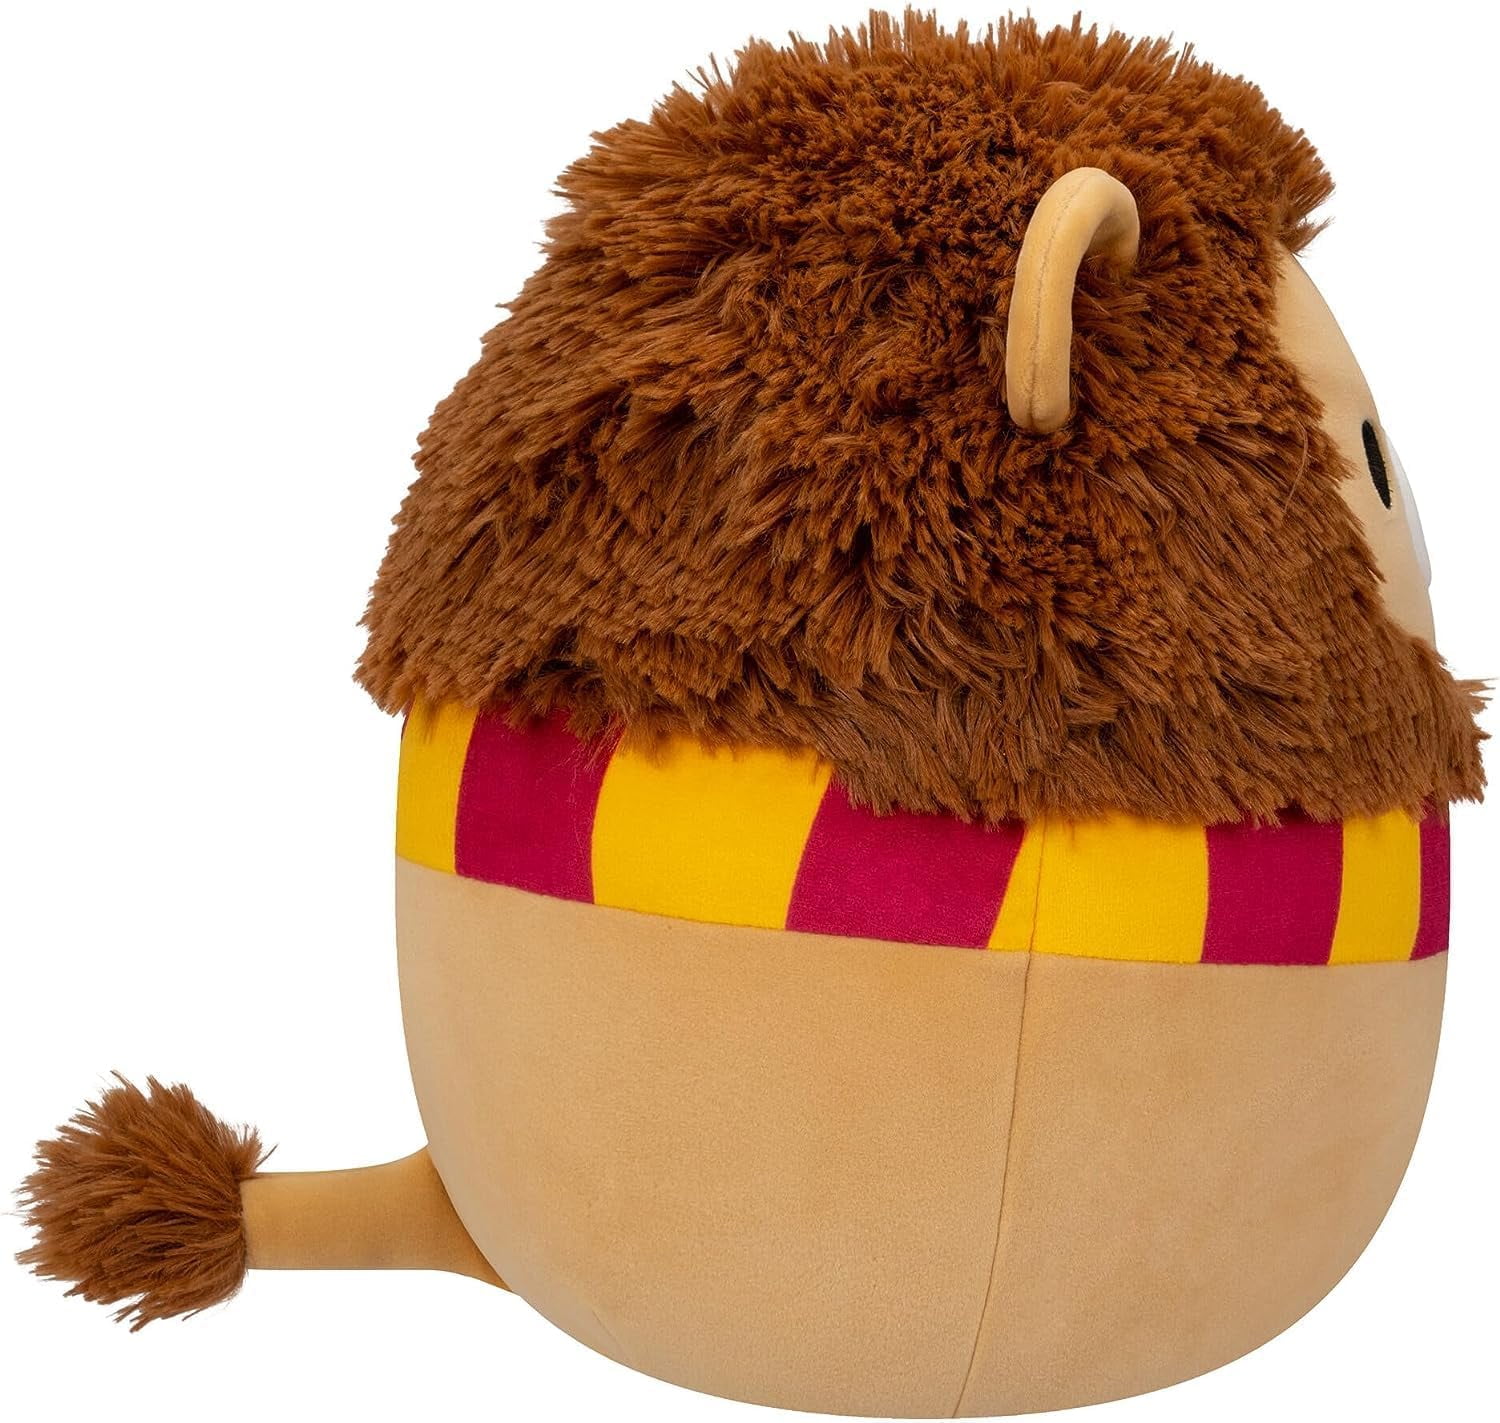 Squishmallows, Other, Nwt Harry Potter Gryffindor Lion Squishmallow